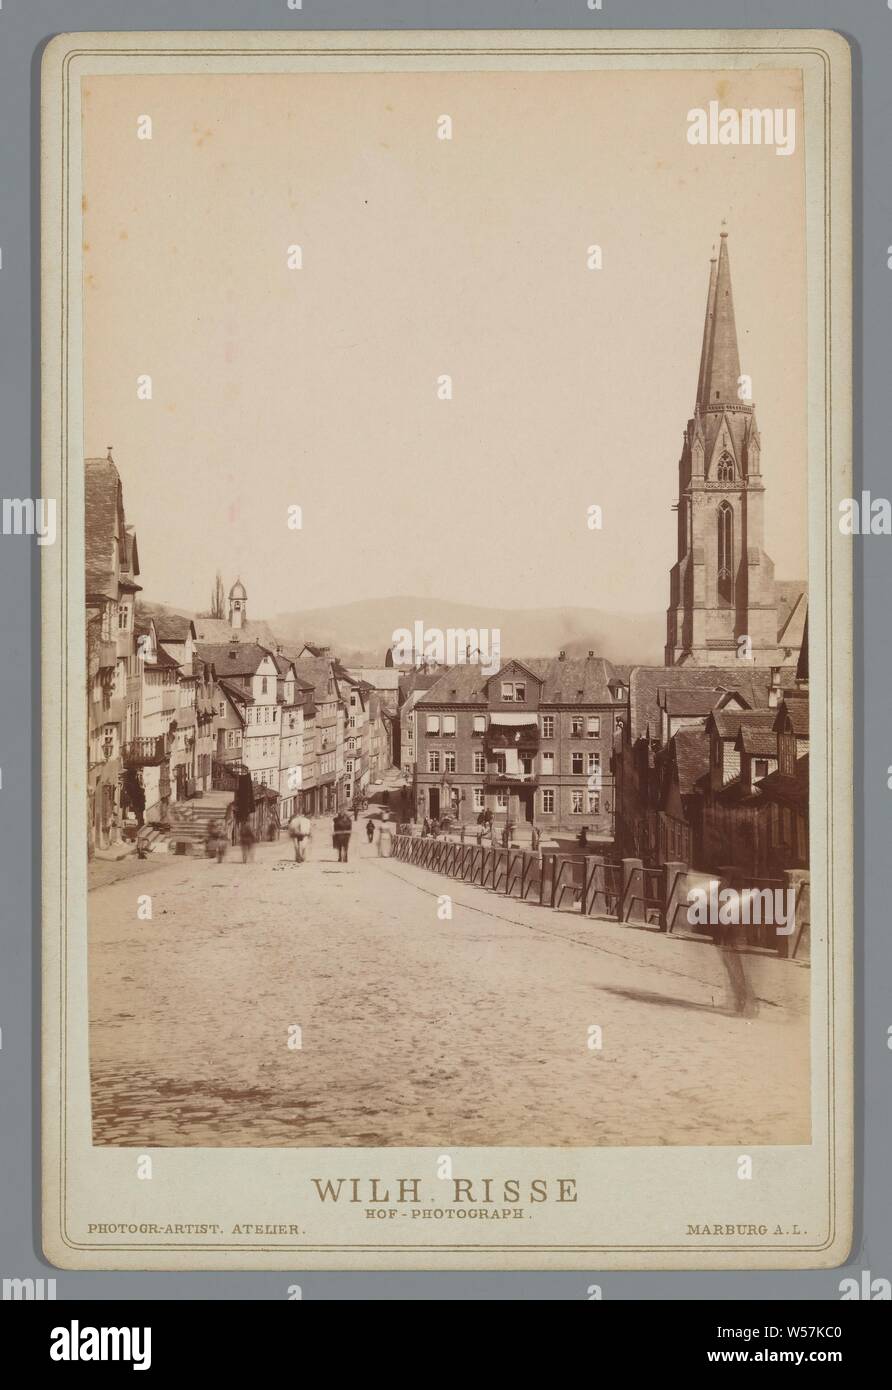 Street view of Marburg, street, Marburg, Wilhelm Risse (mentioned on object), 1850 - 1900, cardboard, photographic paper, albumen print, h 168 mm × w 110 mm Stock Photo